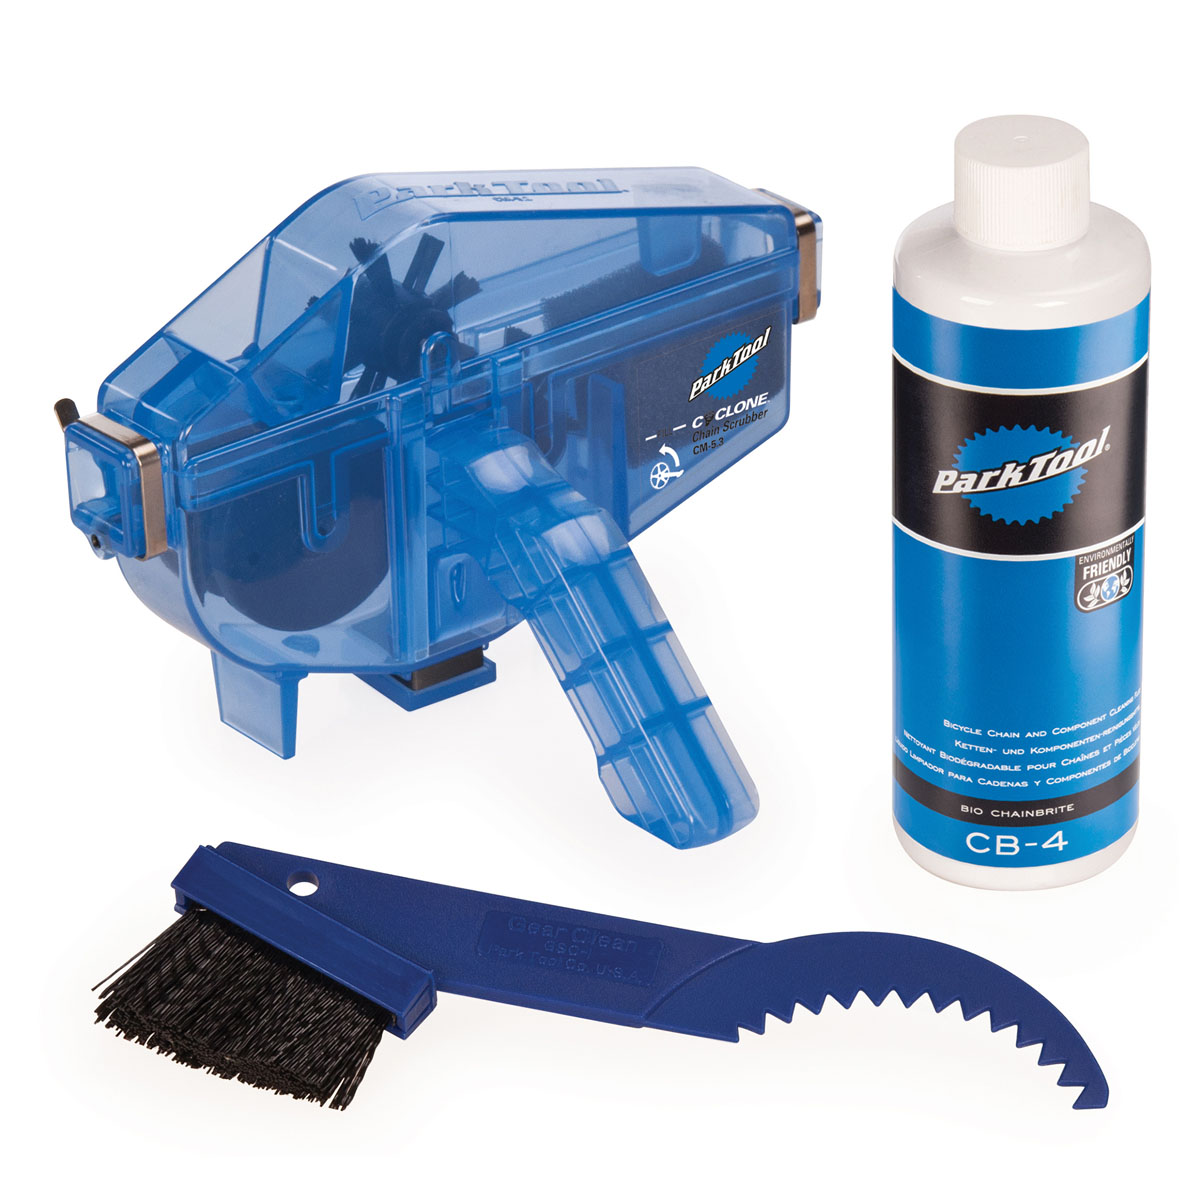 Park Tool Chain Cleaning Kit CG-2.4